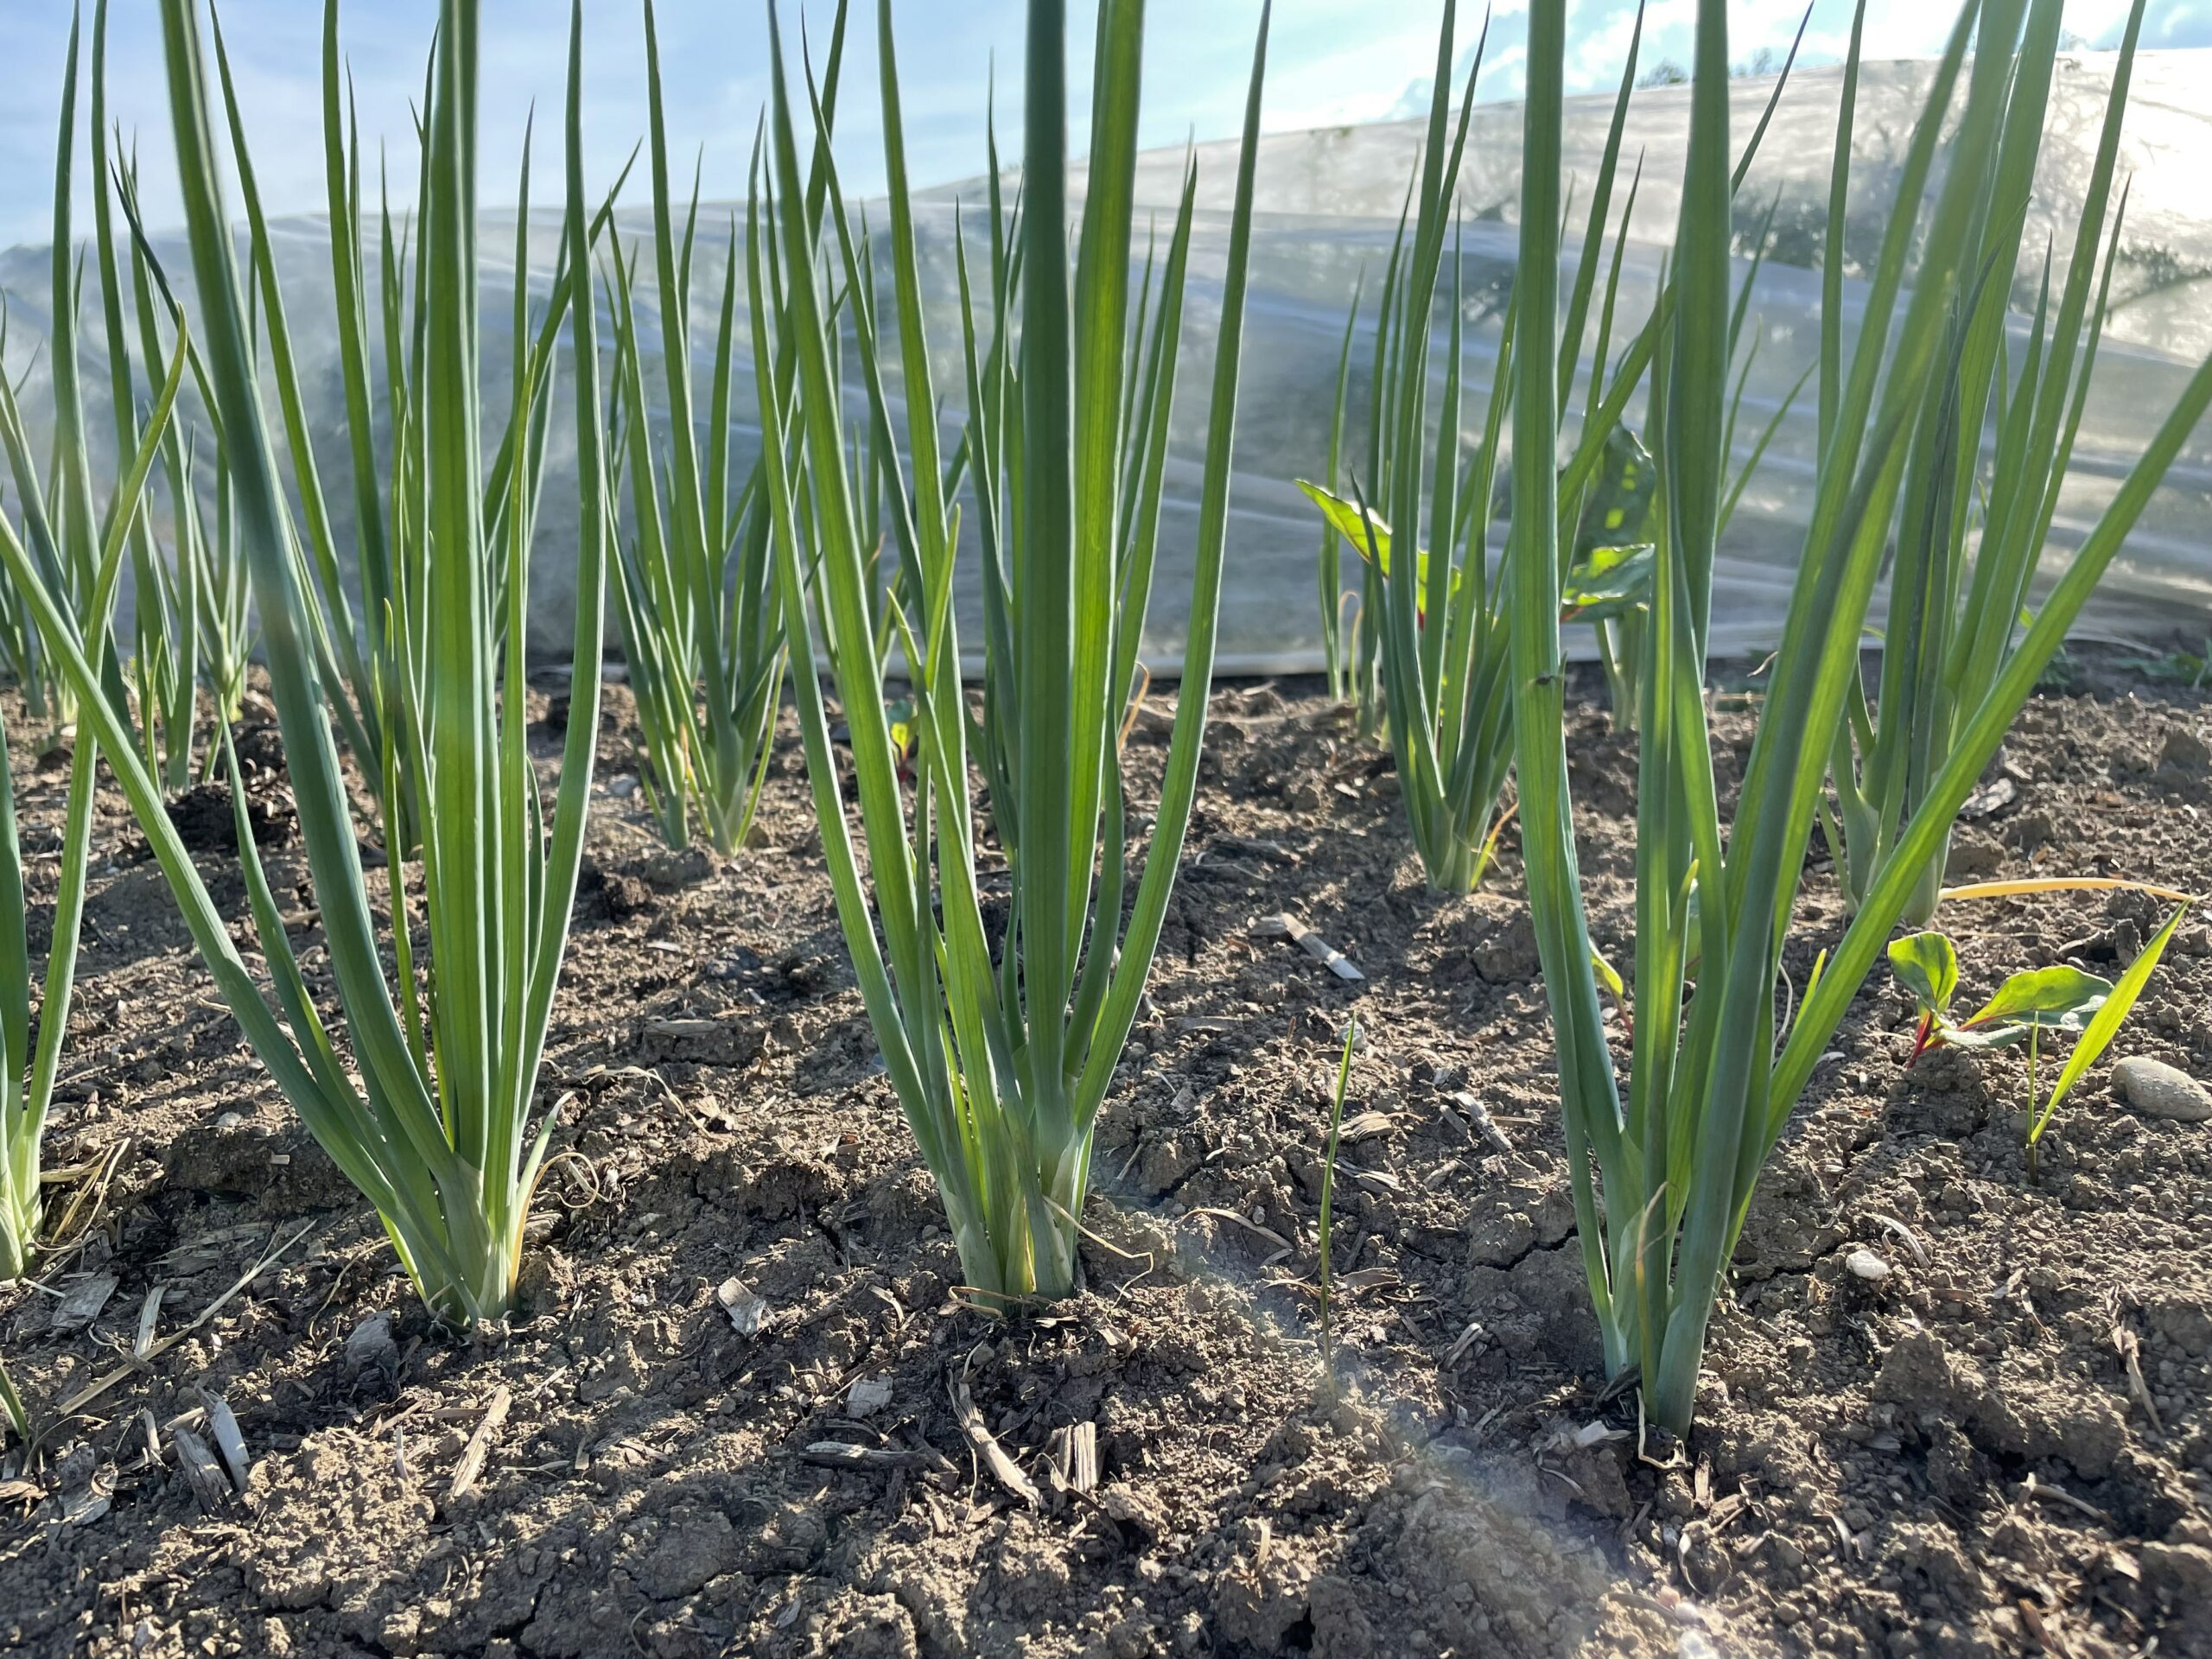 GARLIC SCAPES IN THE SUN scaled - Happy Solstice! KNUCKLE DOWN NEWS, WEEK 2